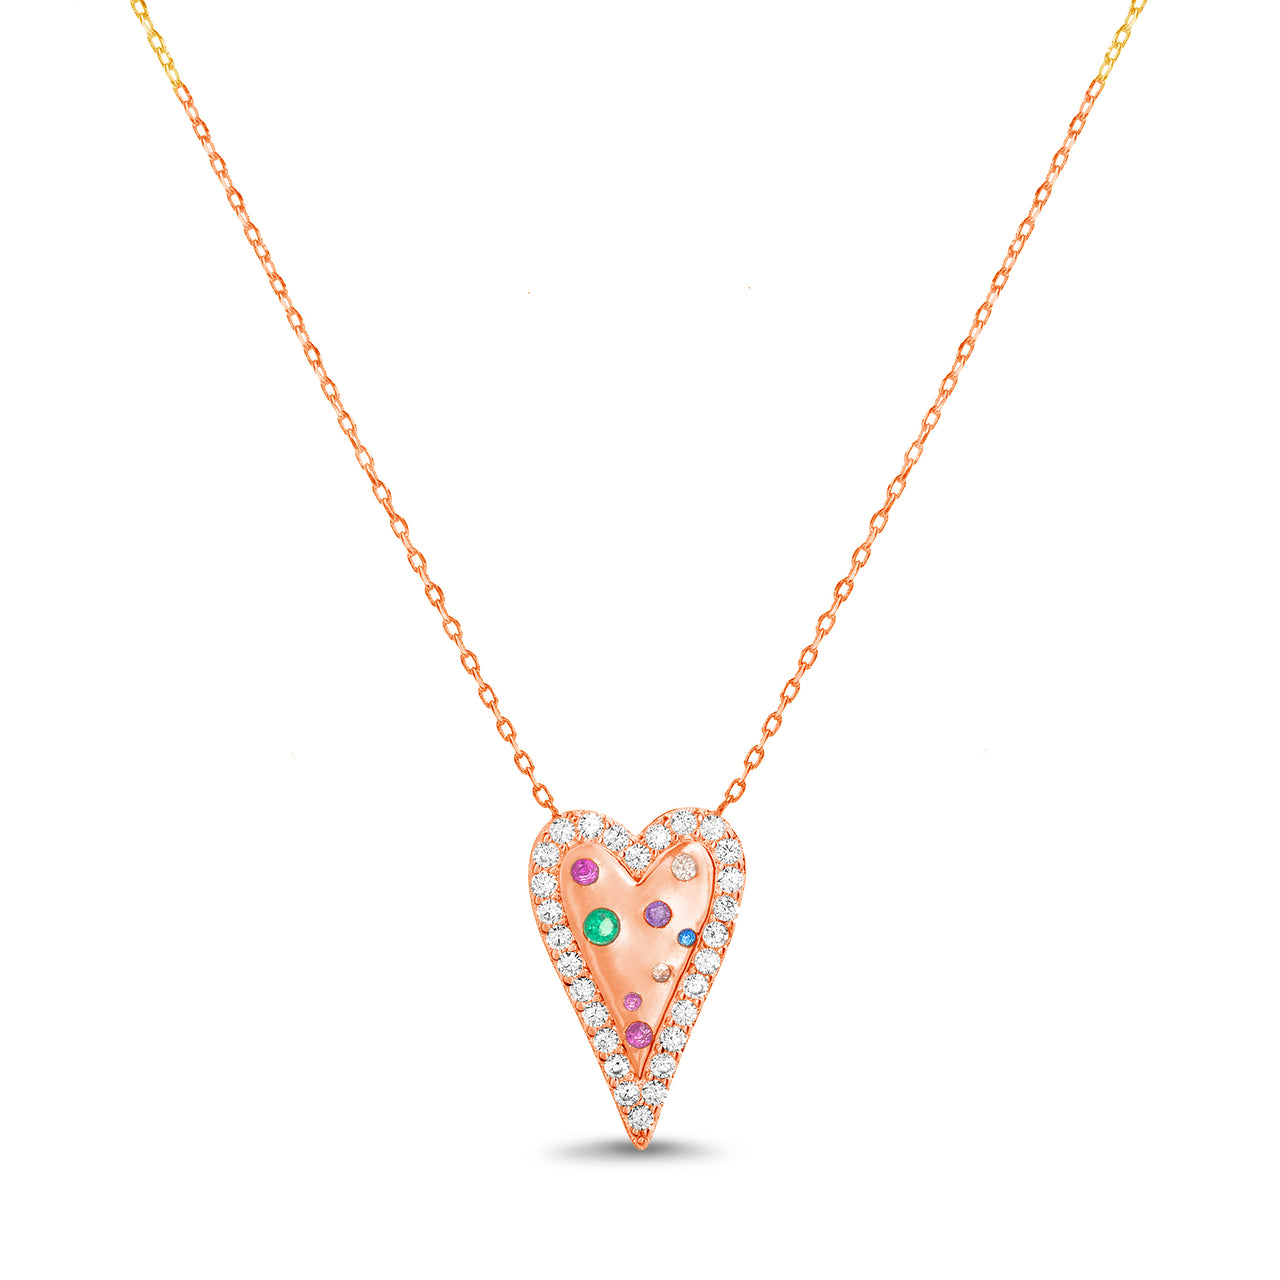 Lesa Michele Rainbow Cubic Zirconia Heart Necklace in Rose Gold Plated Sterling Silver